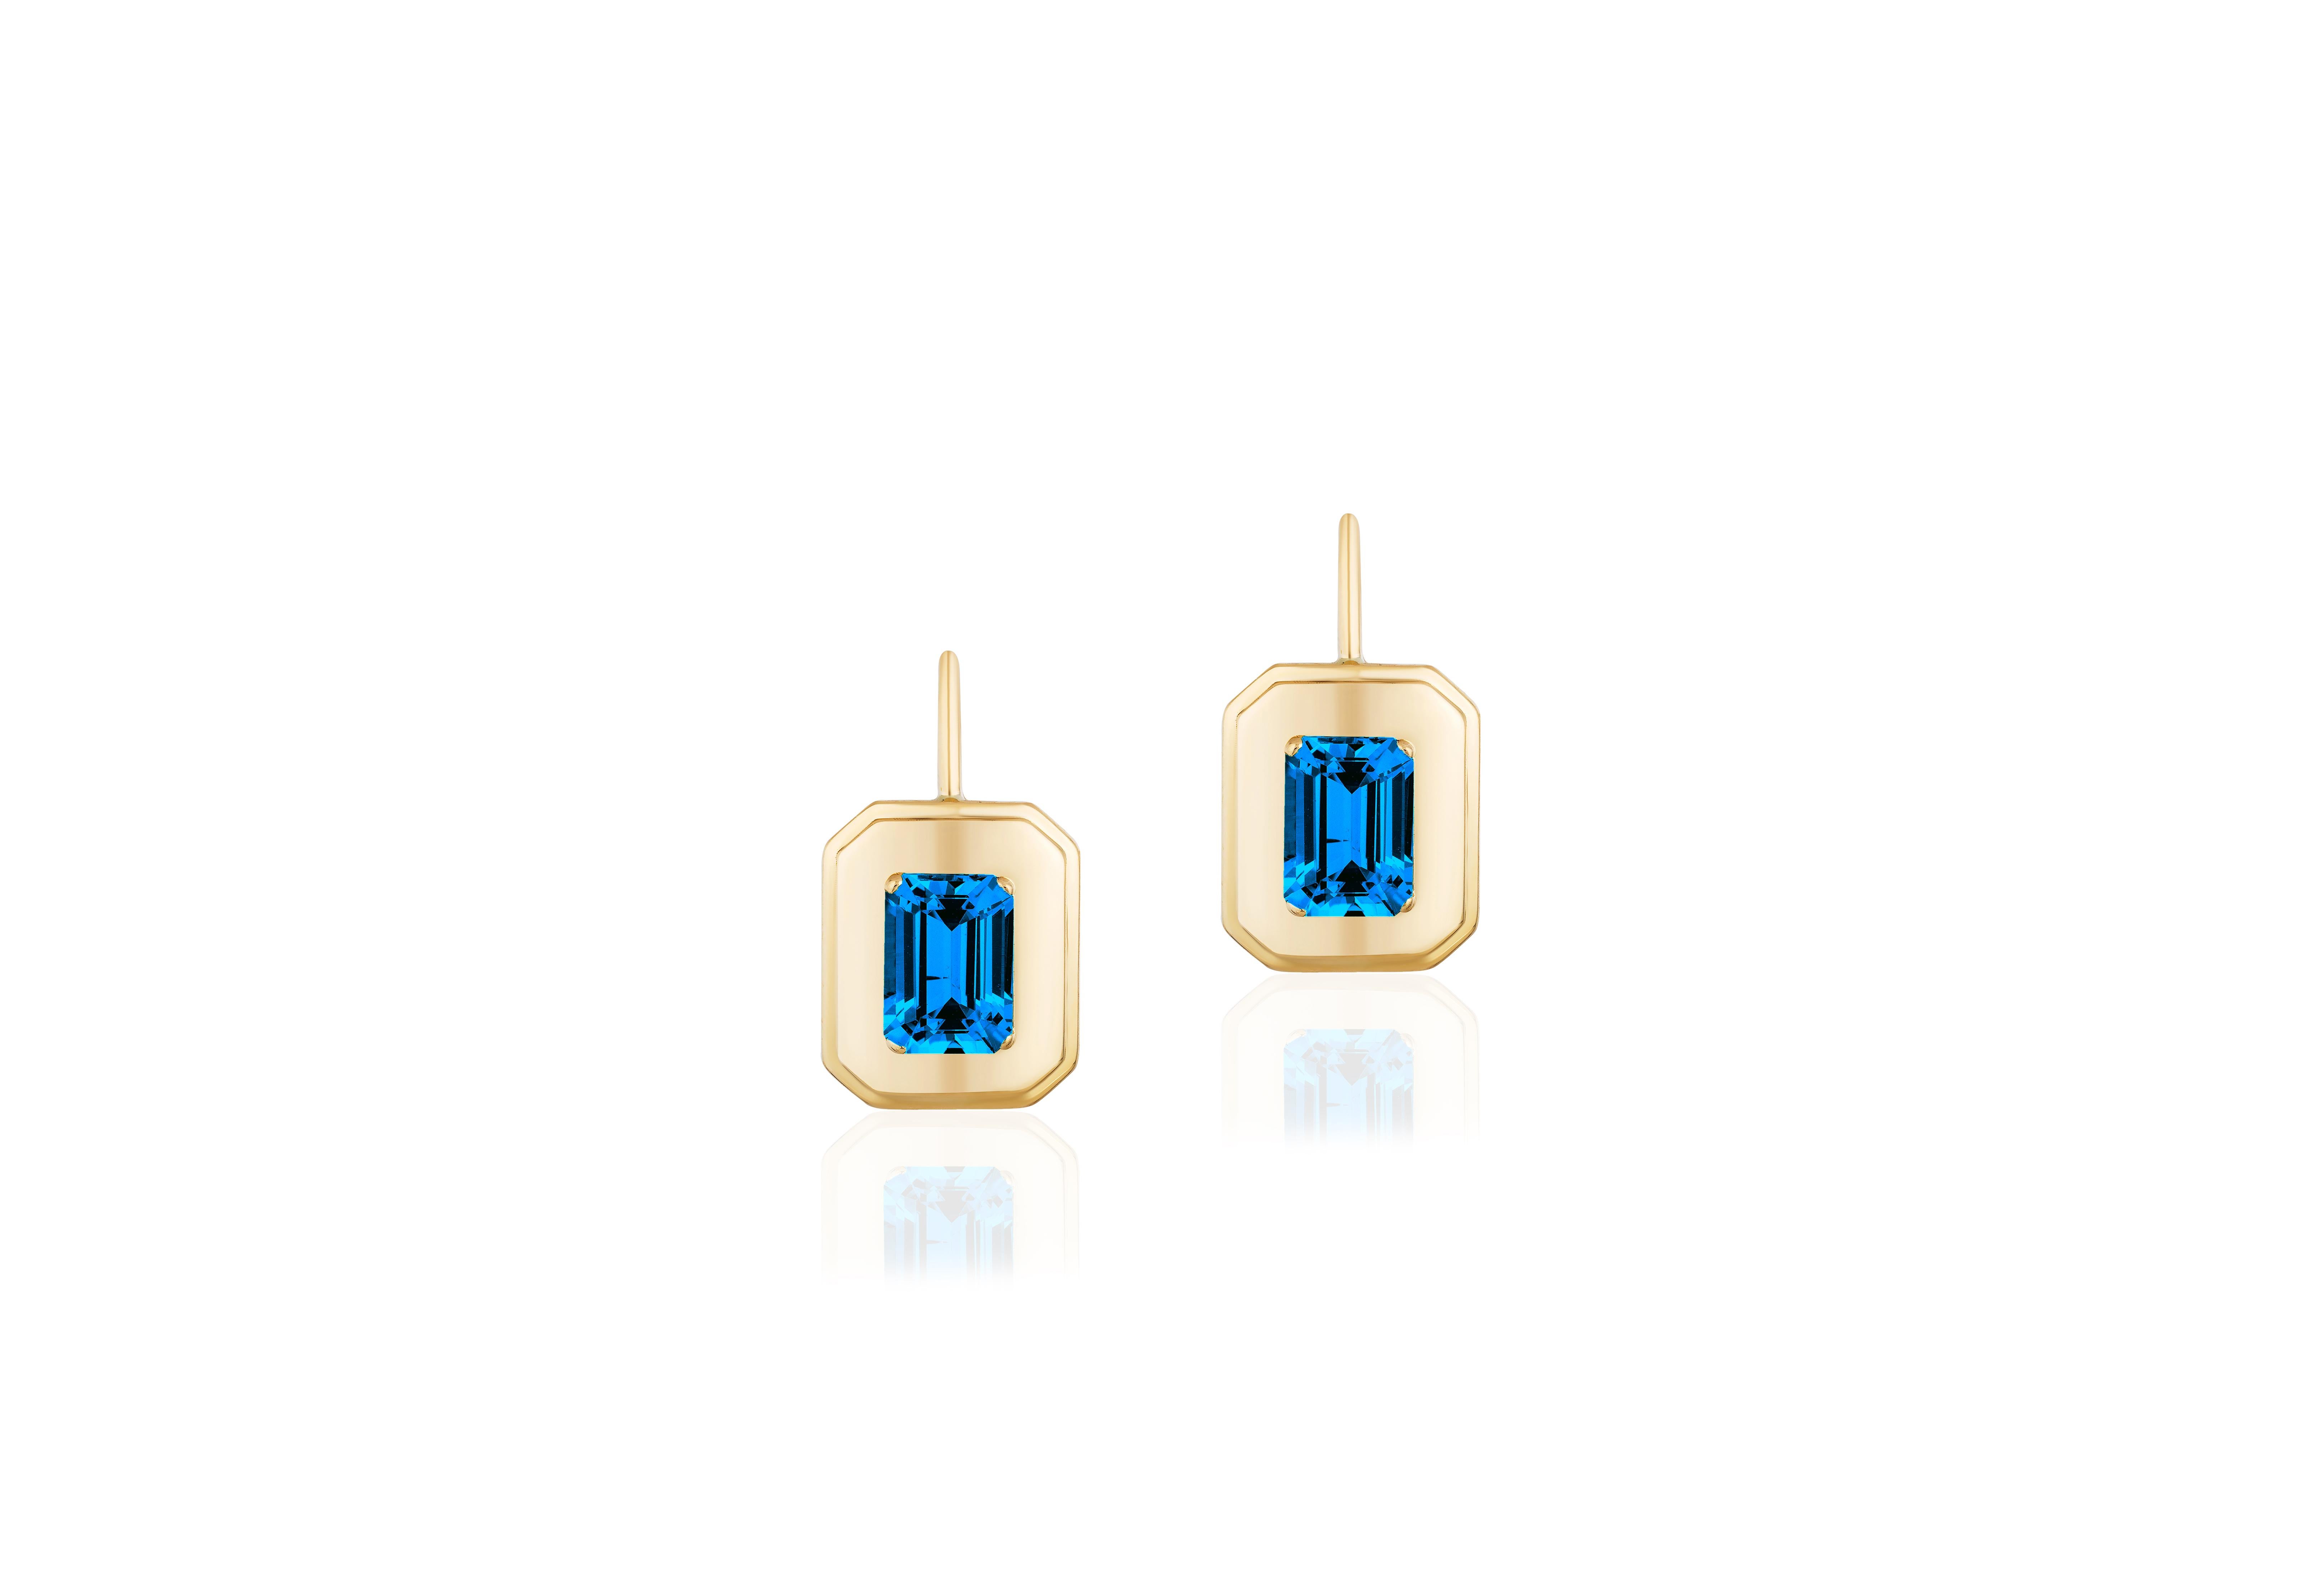 These unique earrings are a London Blue Topaz Emerald Cut, with Lever back. From our ‘Queen’ Collection, it was inspired by royalty, but with a modern twist. The combination of Gold, and London Blue Topaz represents power, richness and passion of a